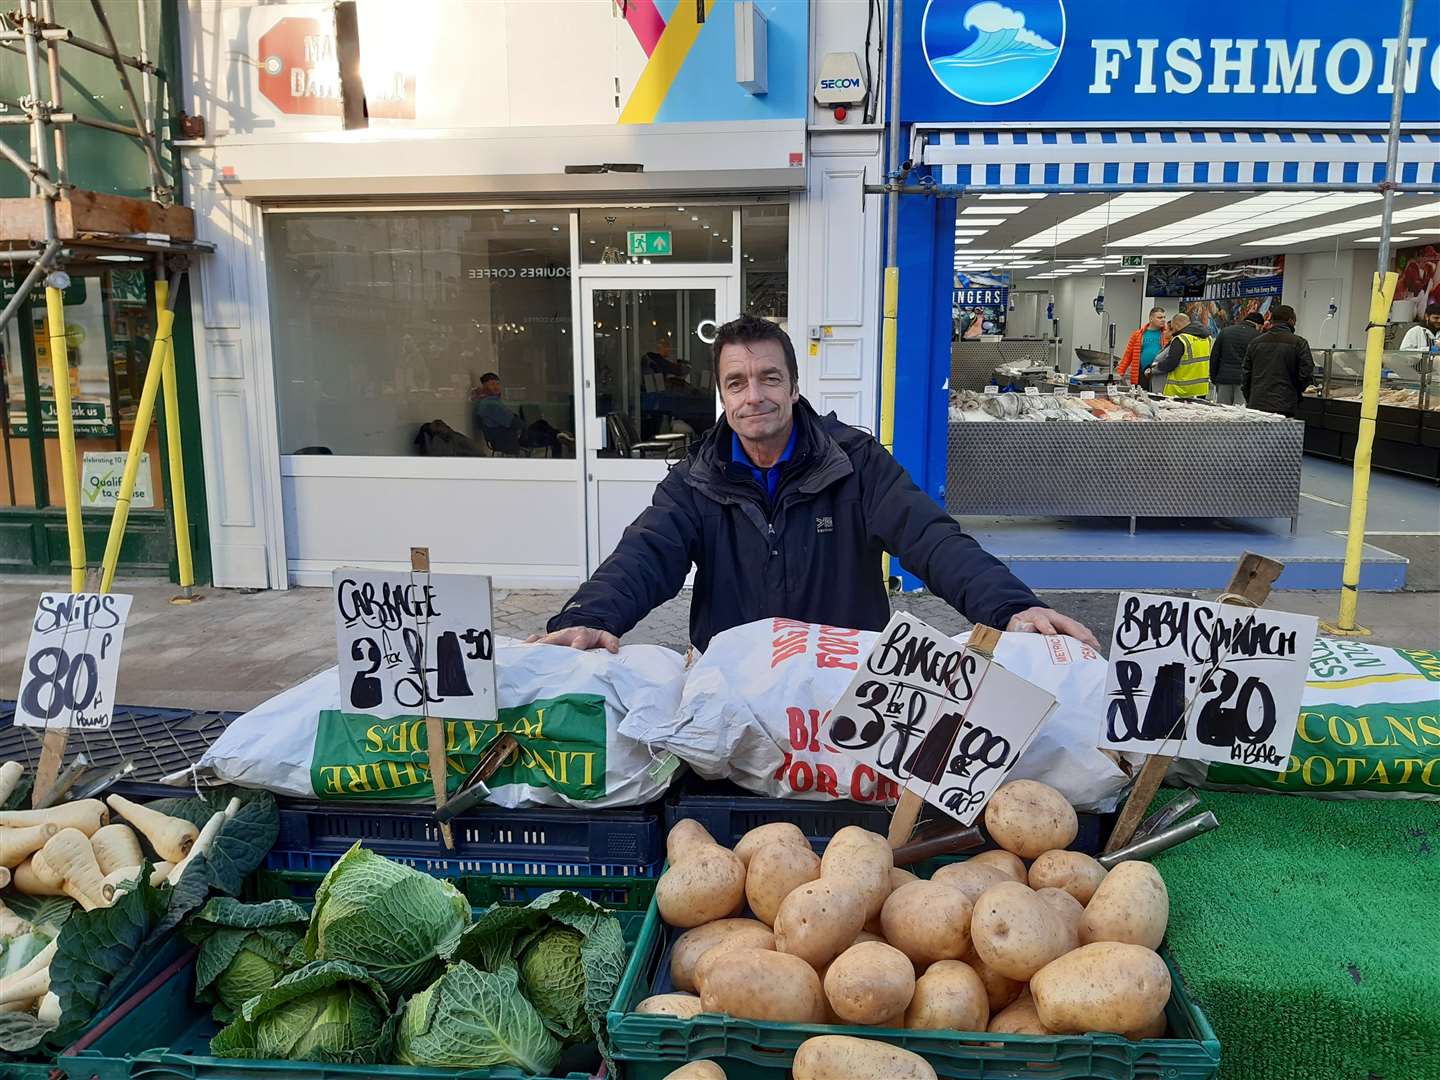 Phil Jenns, 55, who runs a fruit and veg stall says the council's support has been welcome. Photo: Sean Delaney